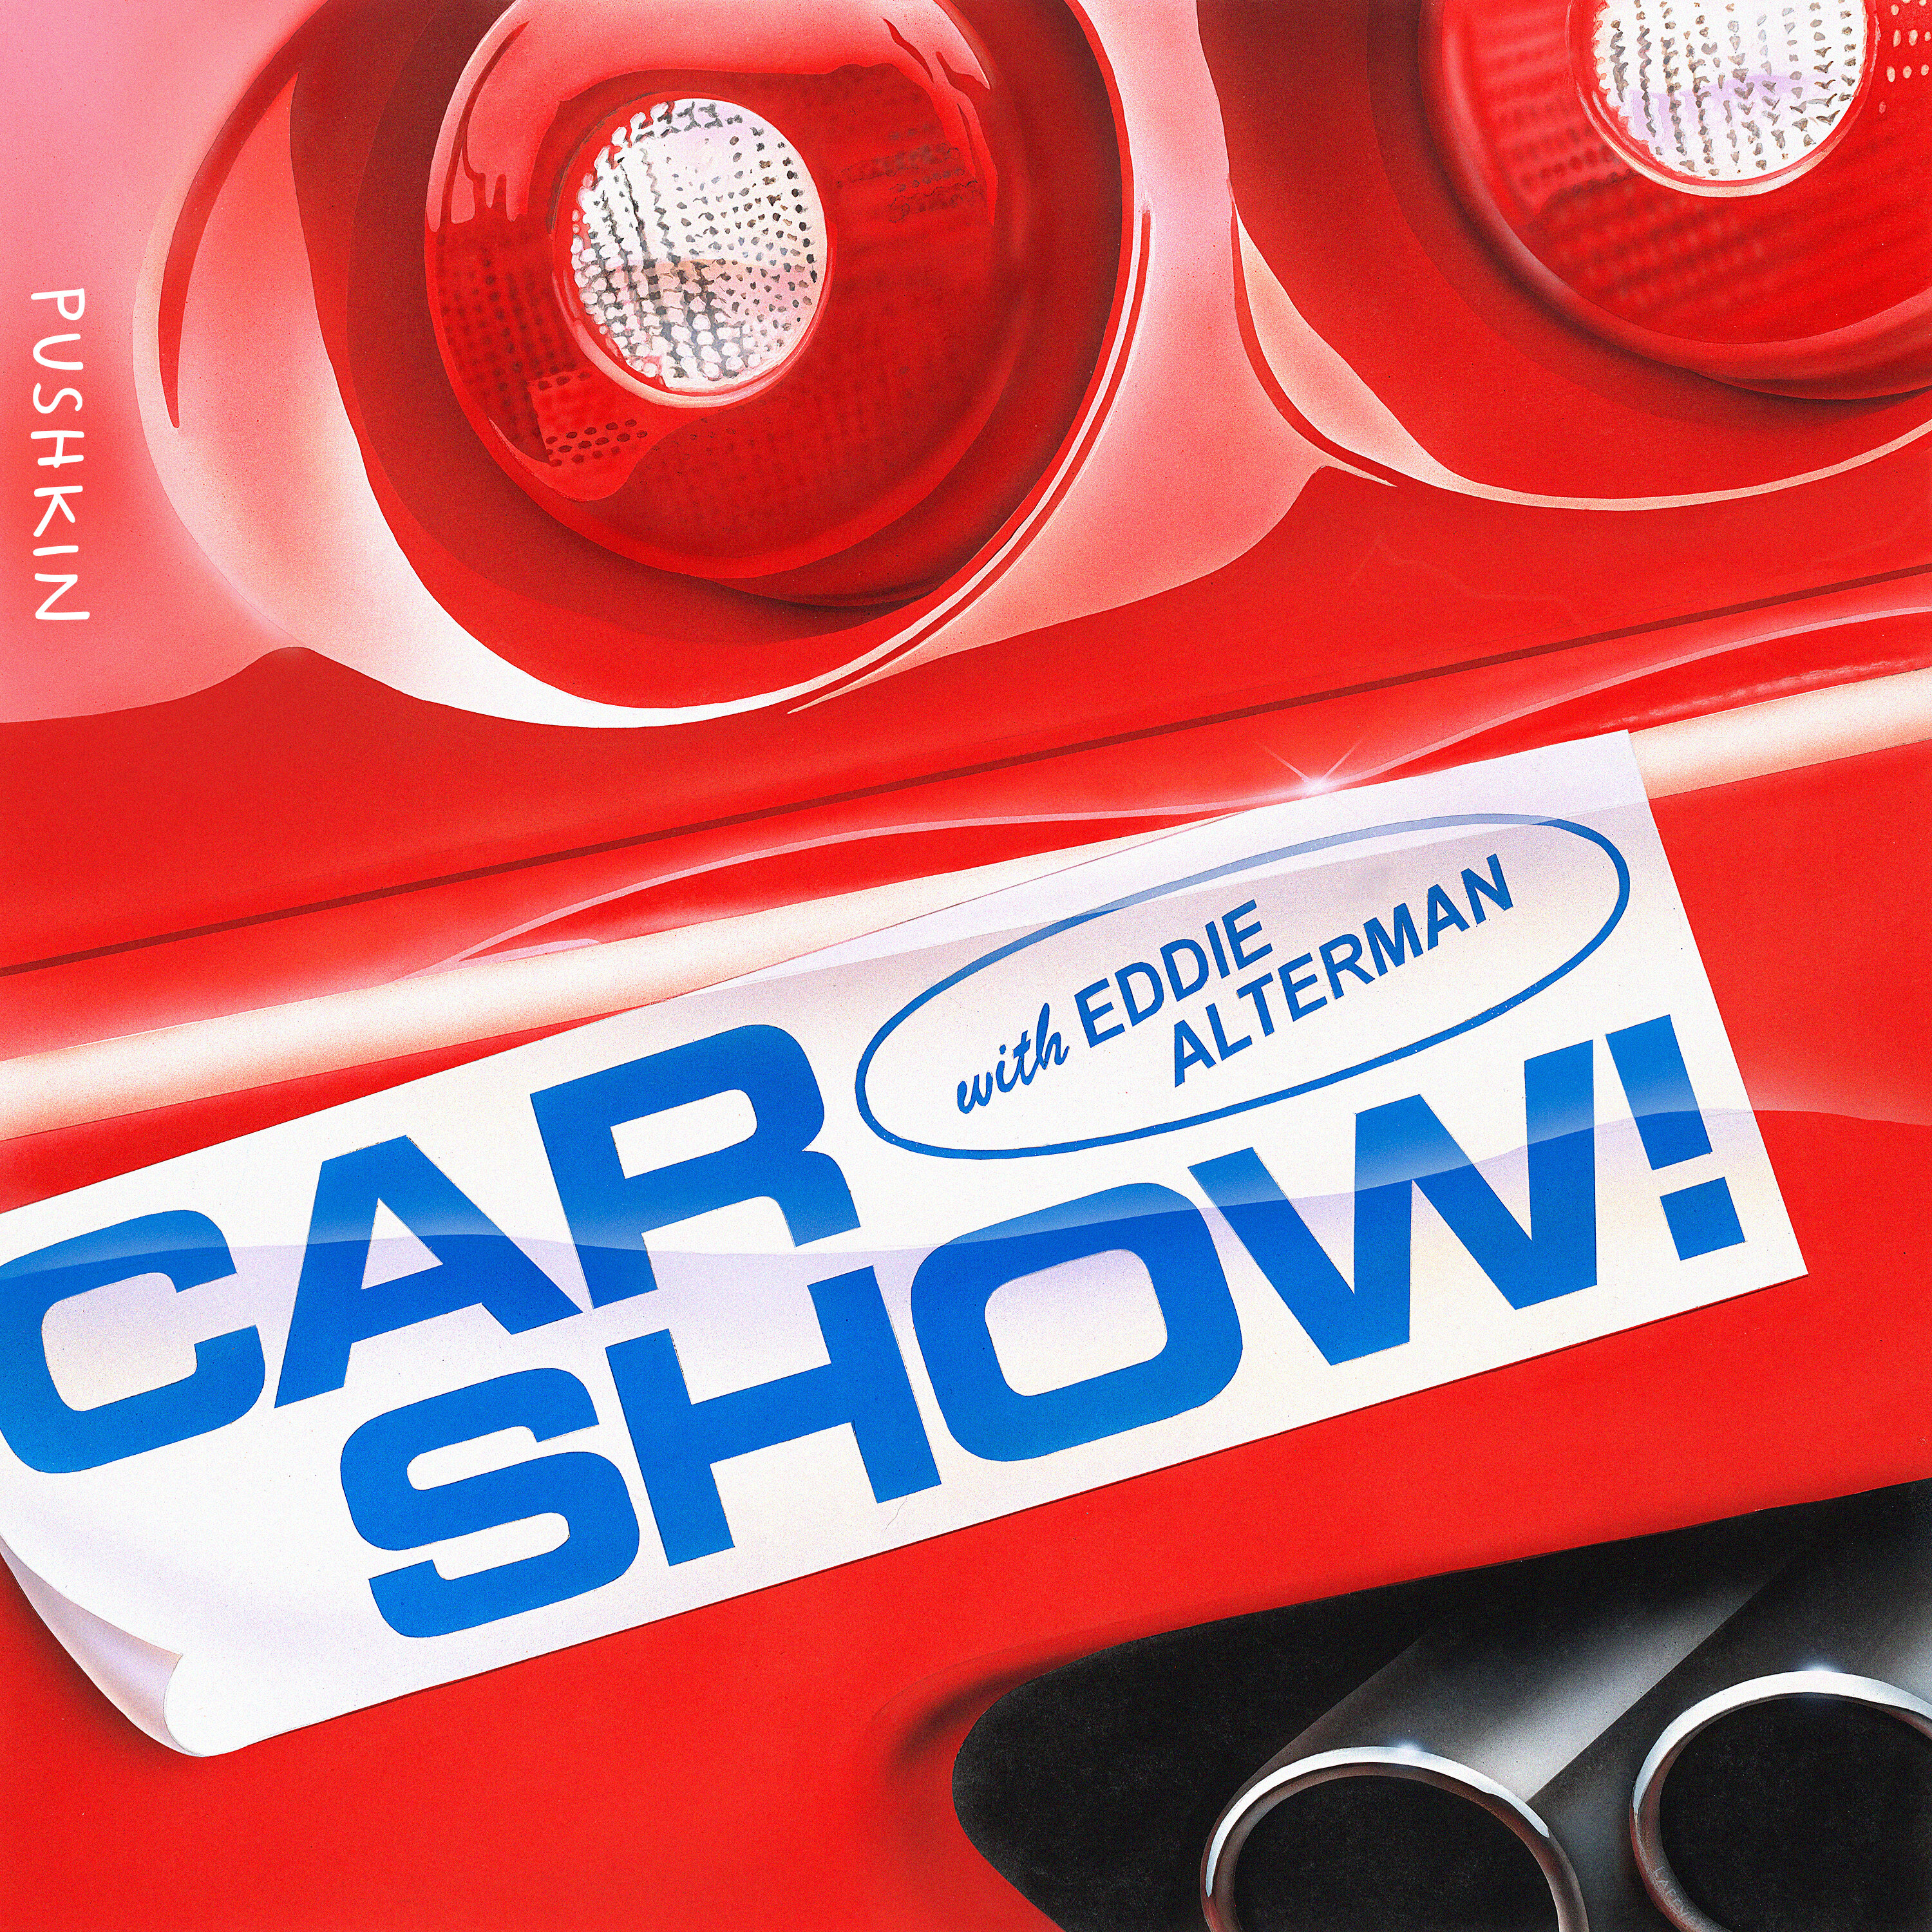 Car Show! with Eddie Alterman podcast show image